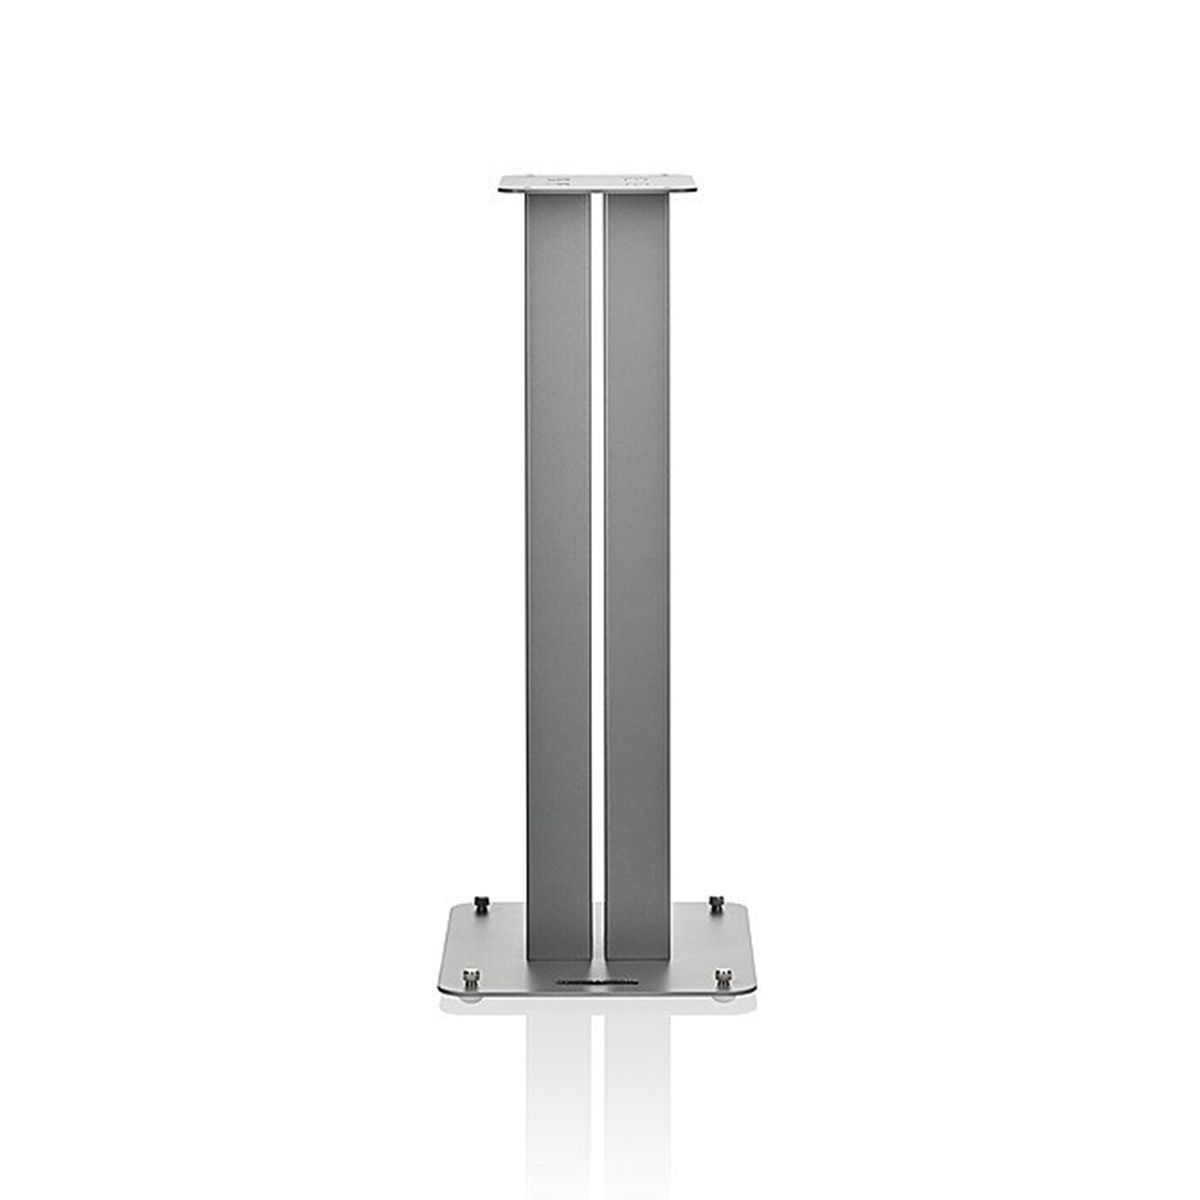 Bowers & Wilkins FS-600 S3 Speaker Stands - single silver - front view